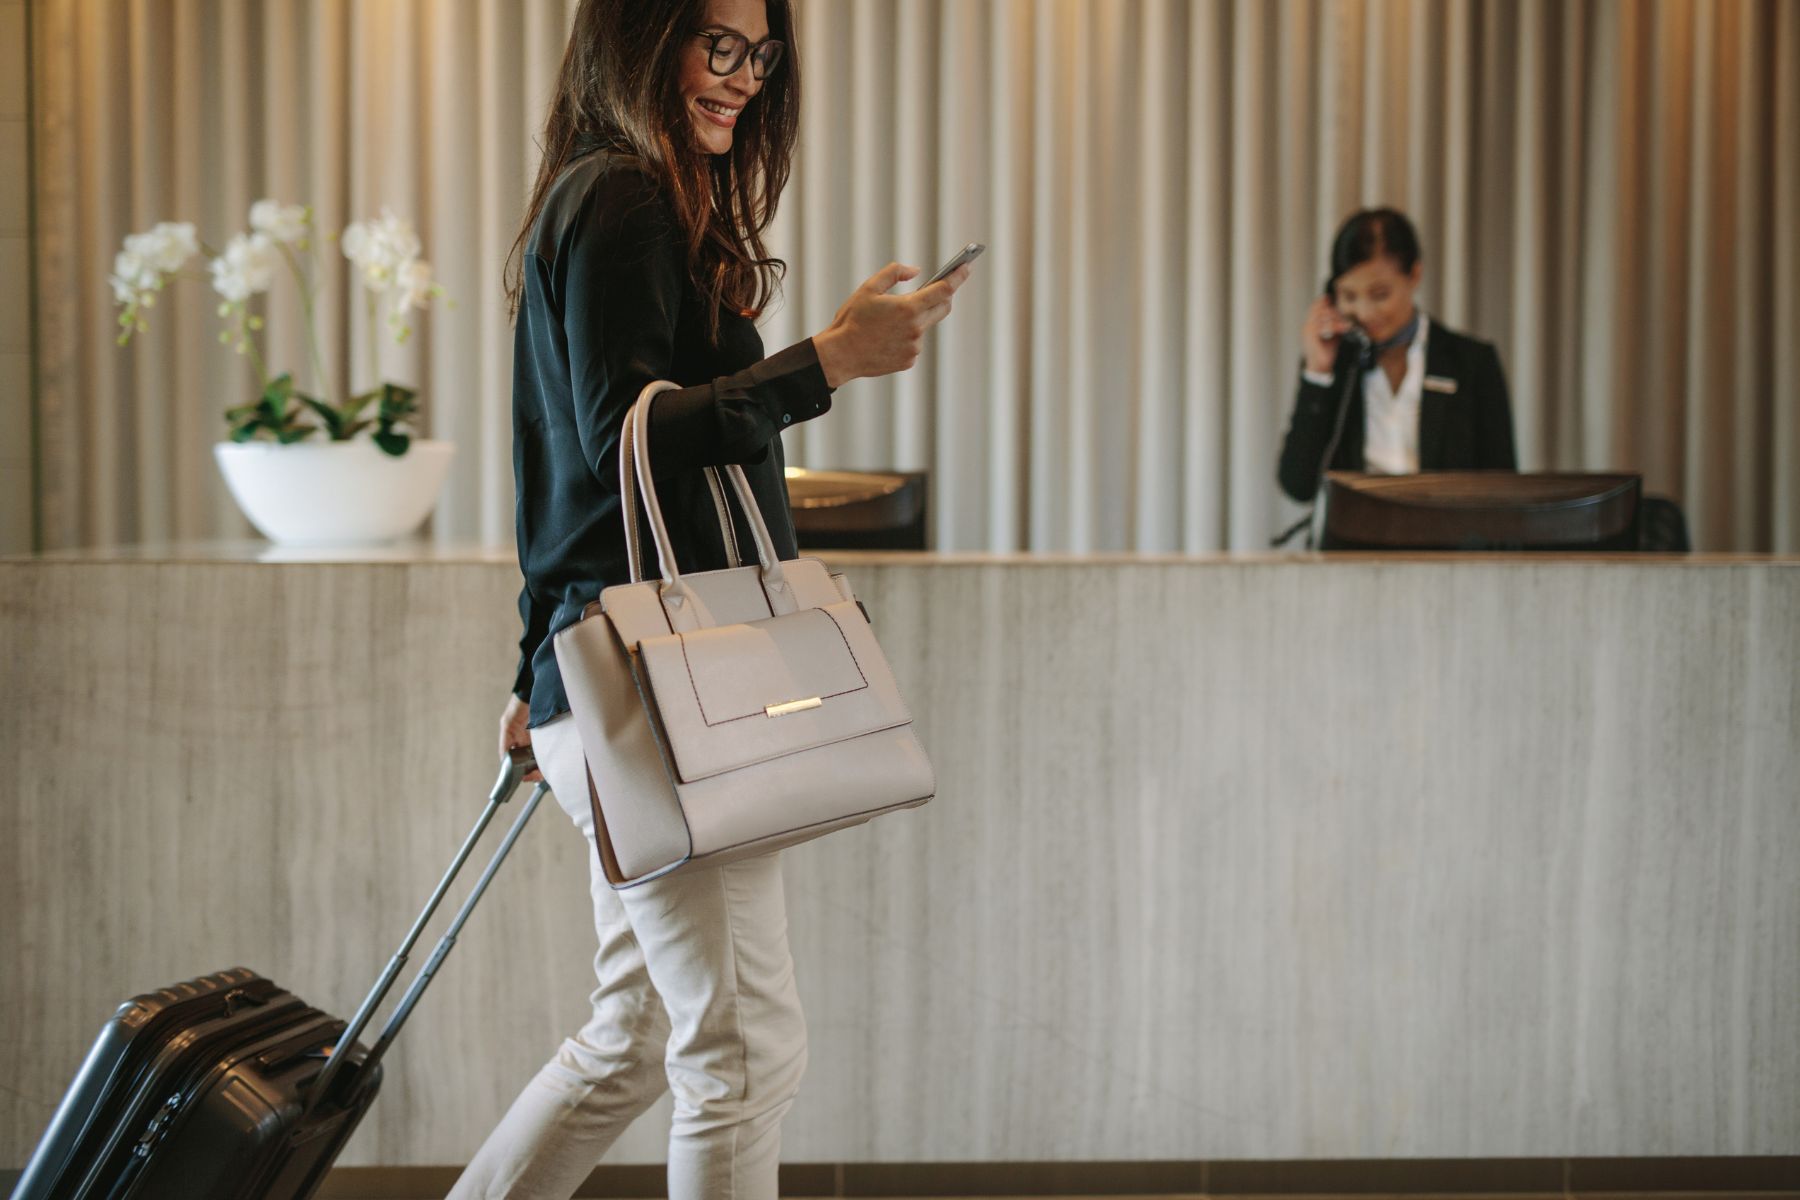 woman with her luggage and bag walking through a lobby